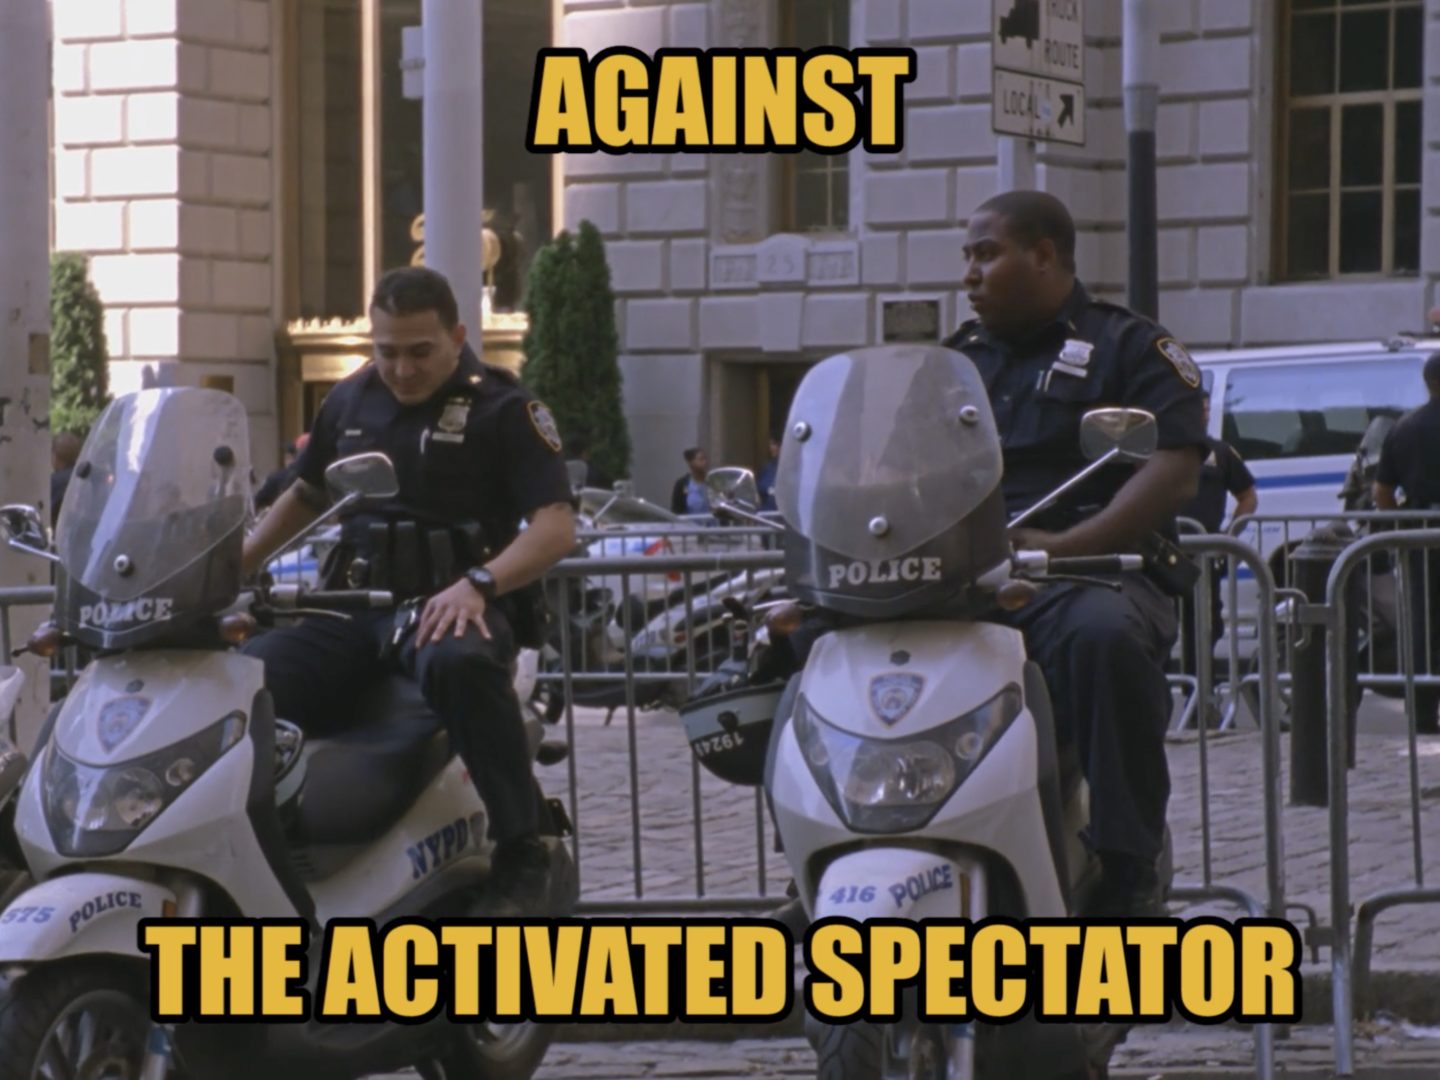 A still from Jason Livingston's film #Rushes/URL (2012). Two policemen on scoooters on a sunny day in New York City. On top and on the bottom of the image are superimposed words like a mid-2000s meme in Impact font: "AGAINST THE ACTIVATED SPECTATOR"